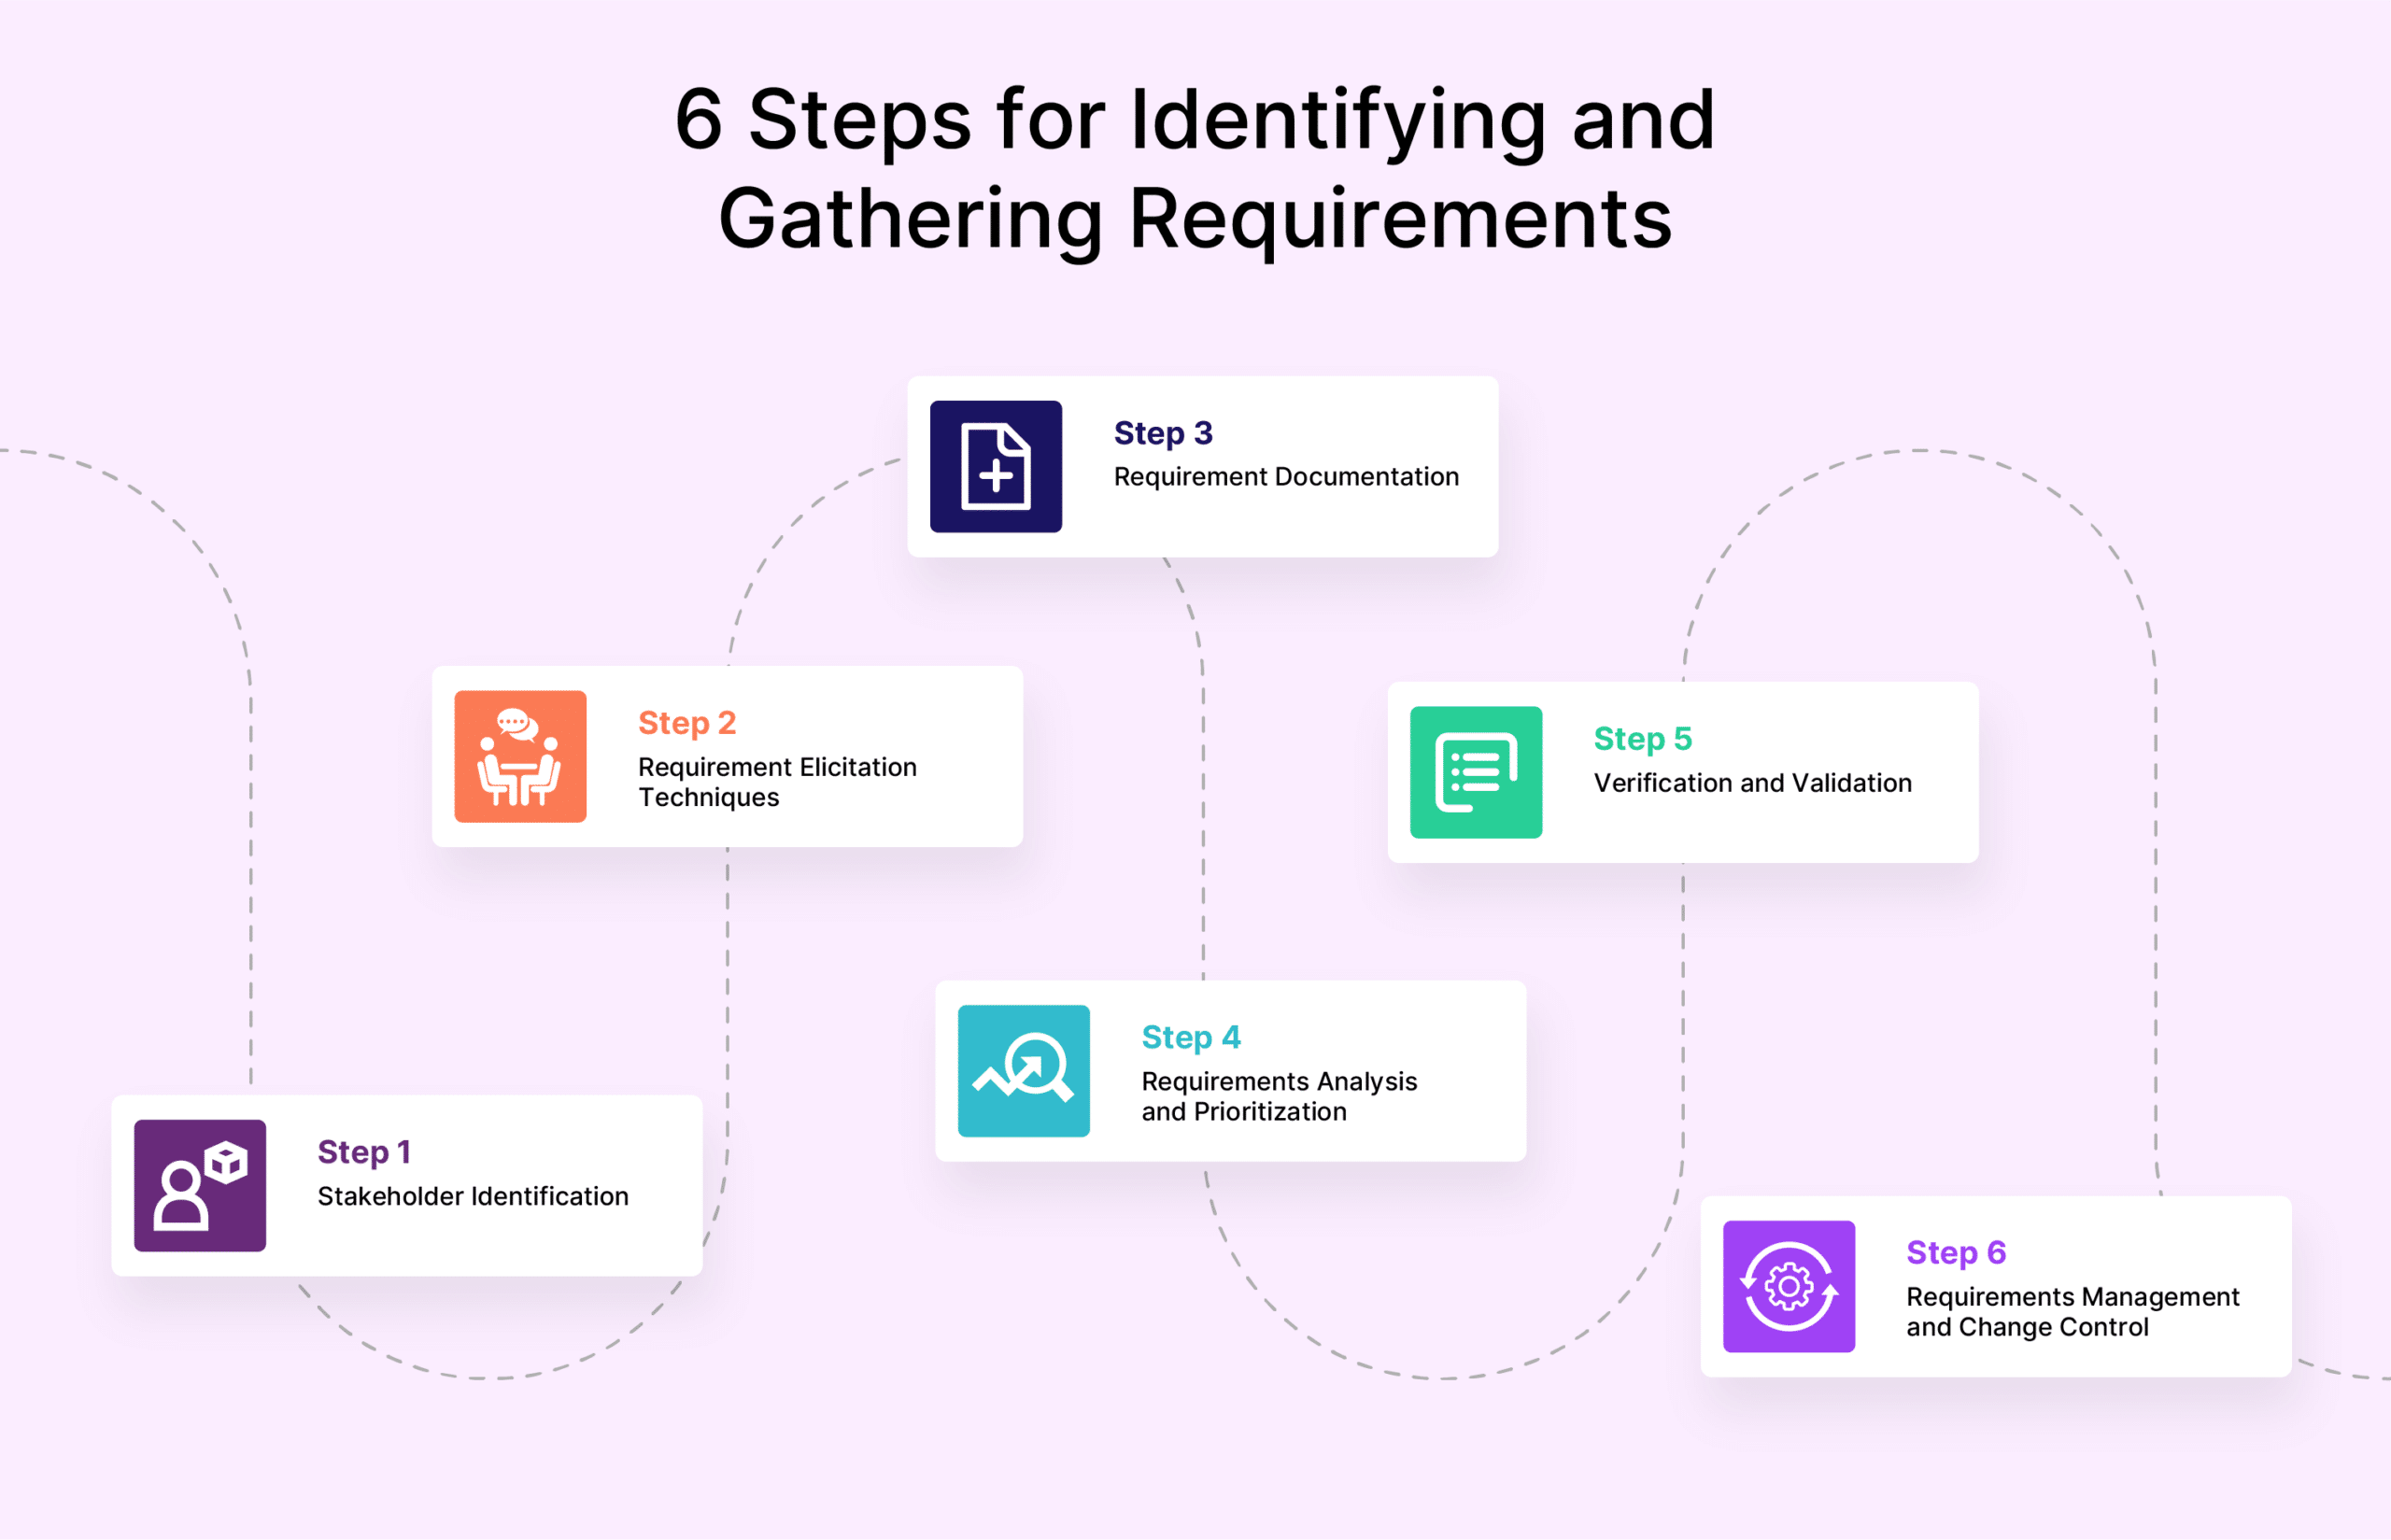 Diagram of Requirements Gathering Steps with icons: Stakeholder Identification, Documentation, Analysis, Verification, and Management on a gradient background.